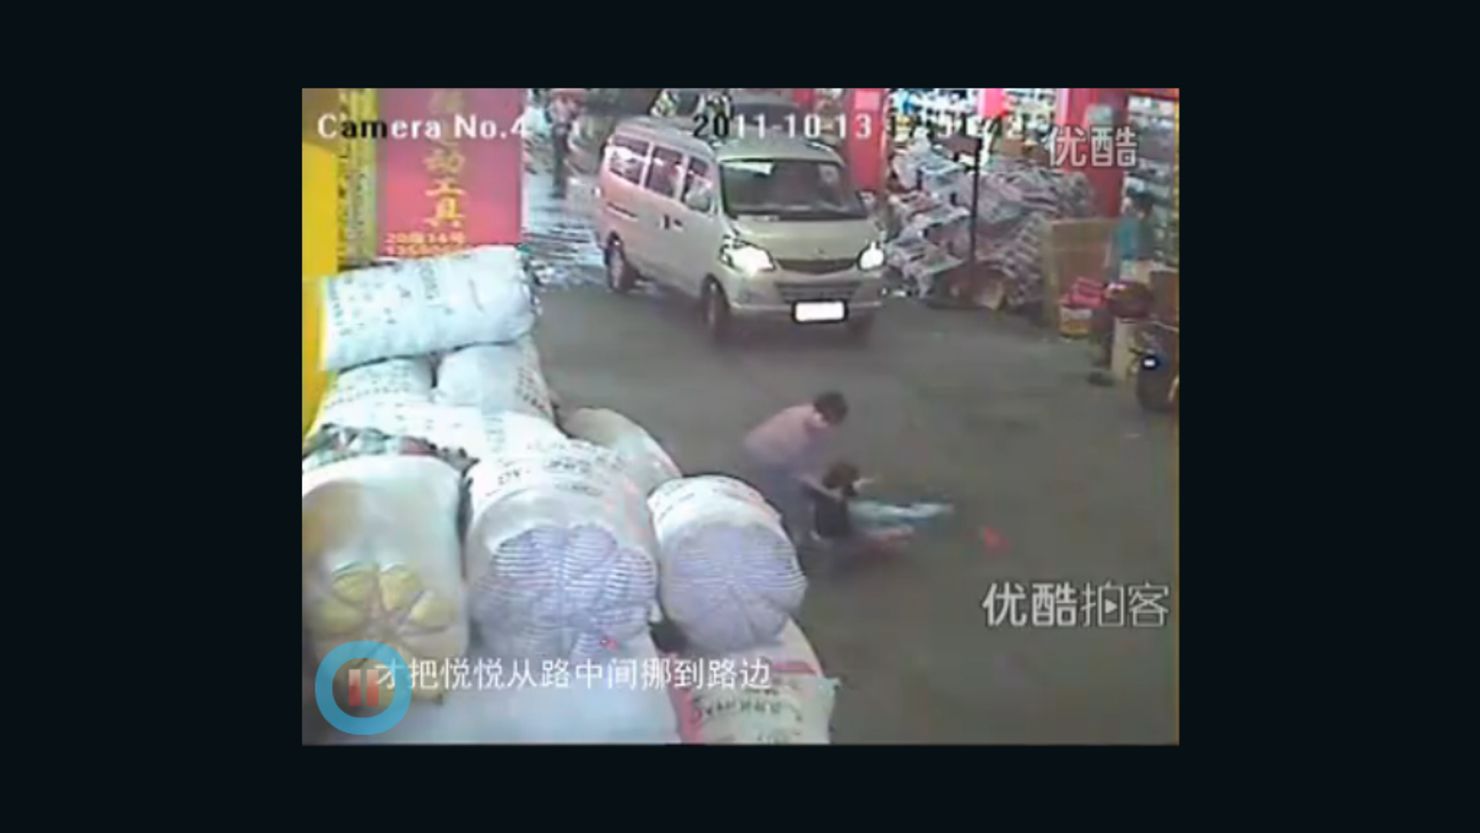 A screen grab of an incident on a China street where a toddler was run down shows a rescuer finally helping her